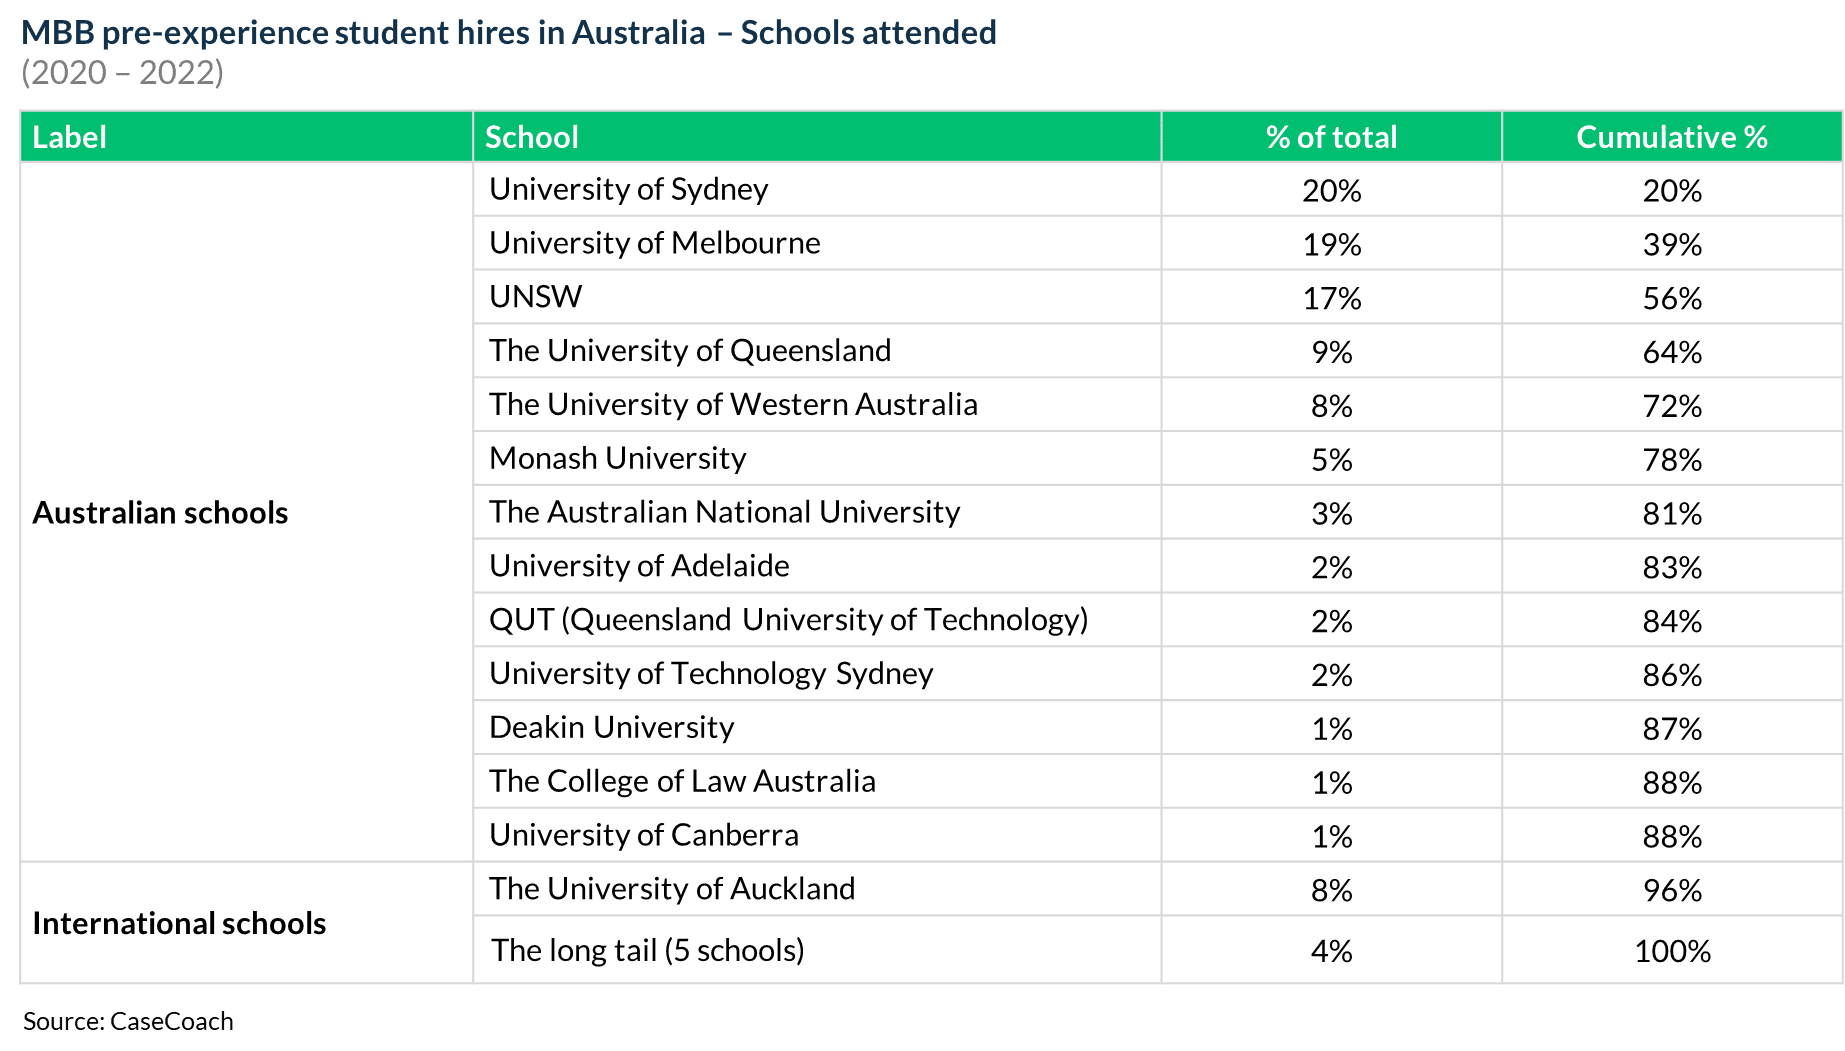 Universities attended by McKinsey, BCG, and Bain's pre-experience student hires in Australia